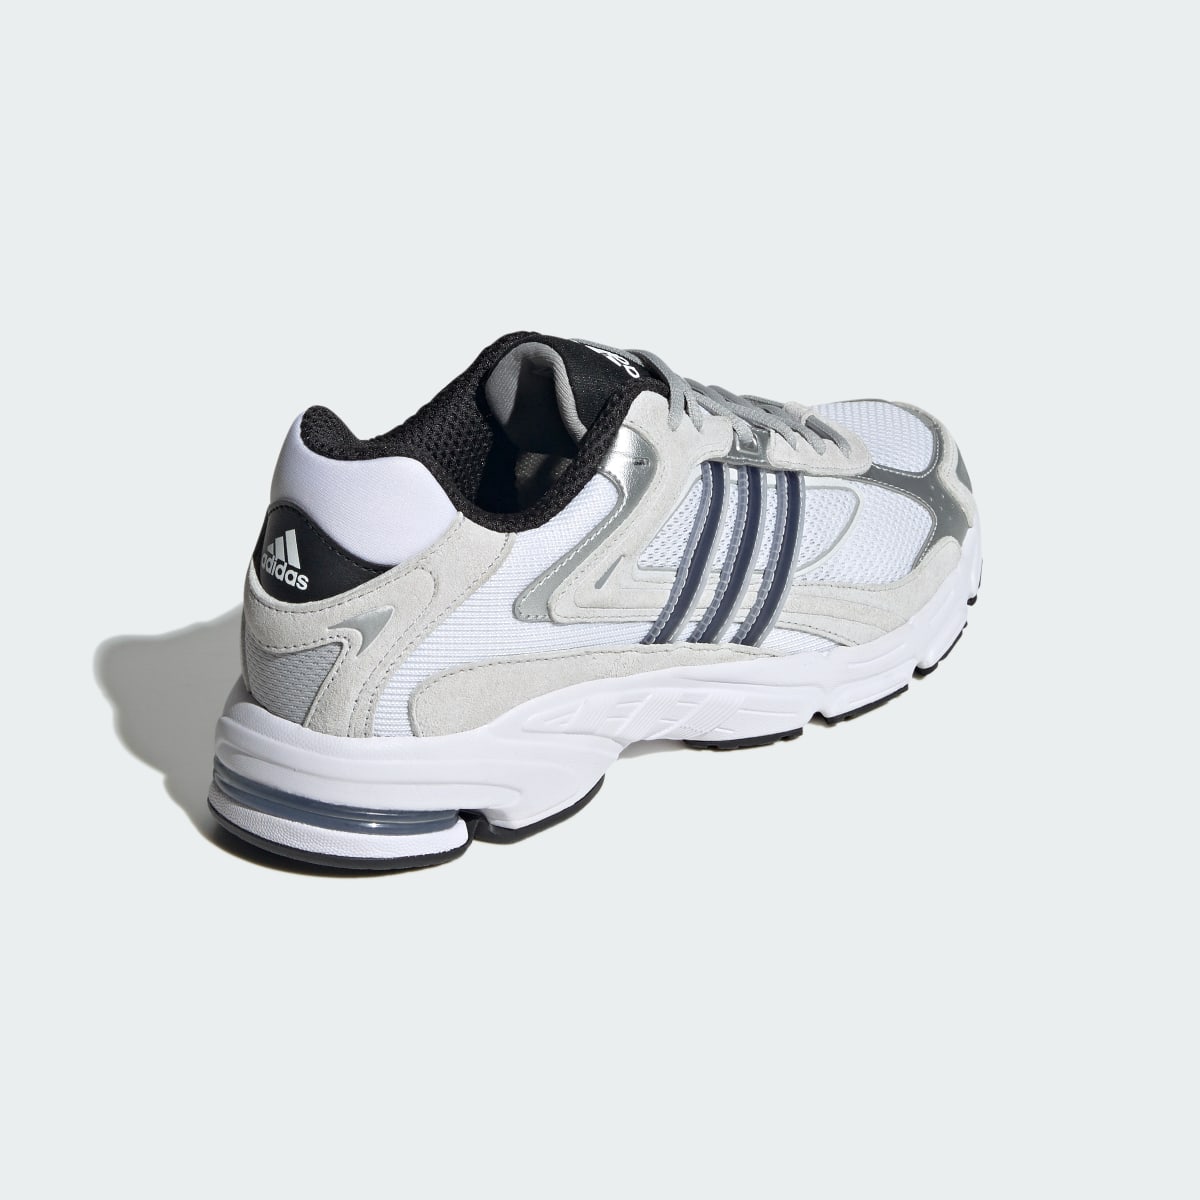 Adidas Chaussure Response CL. 6